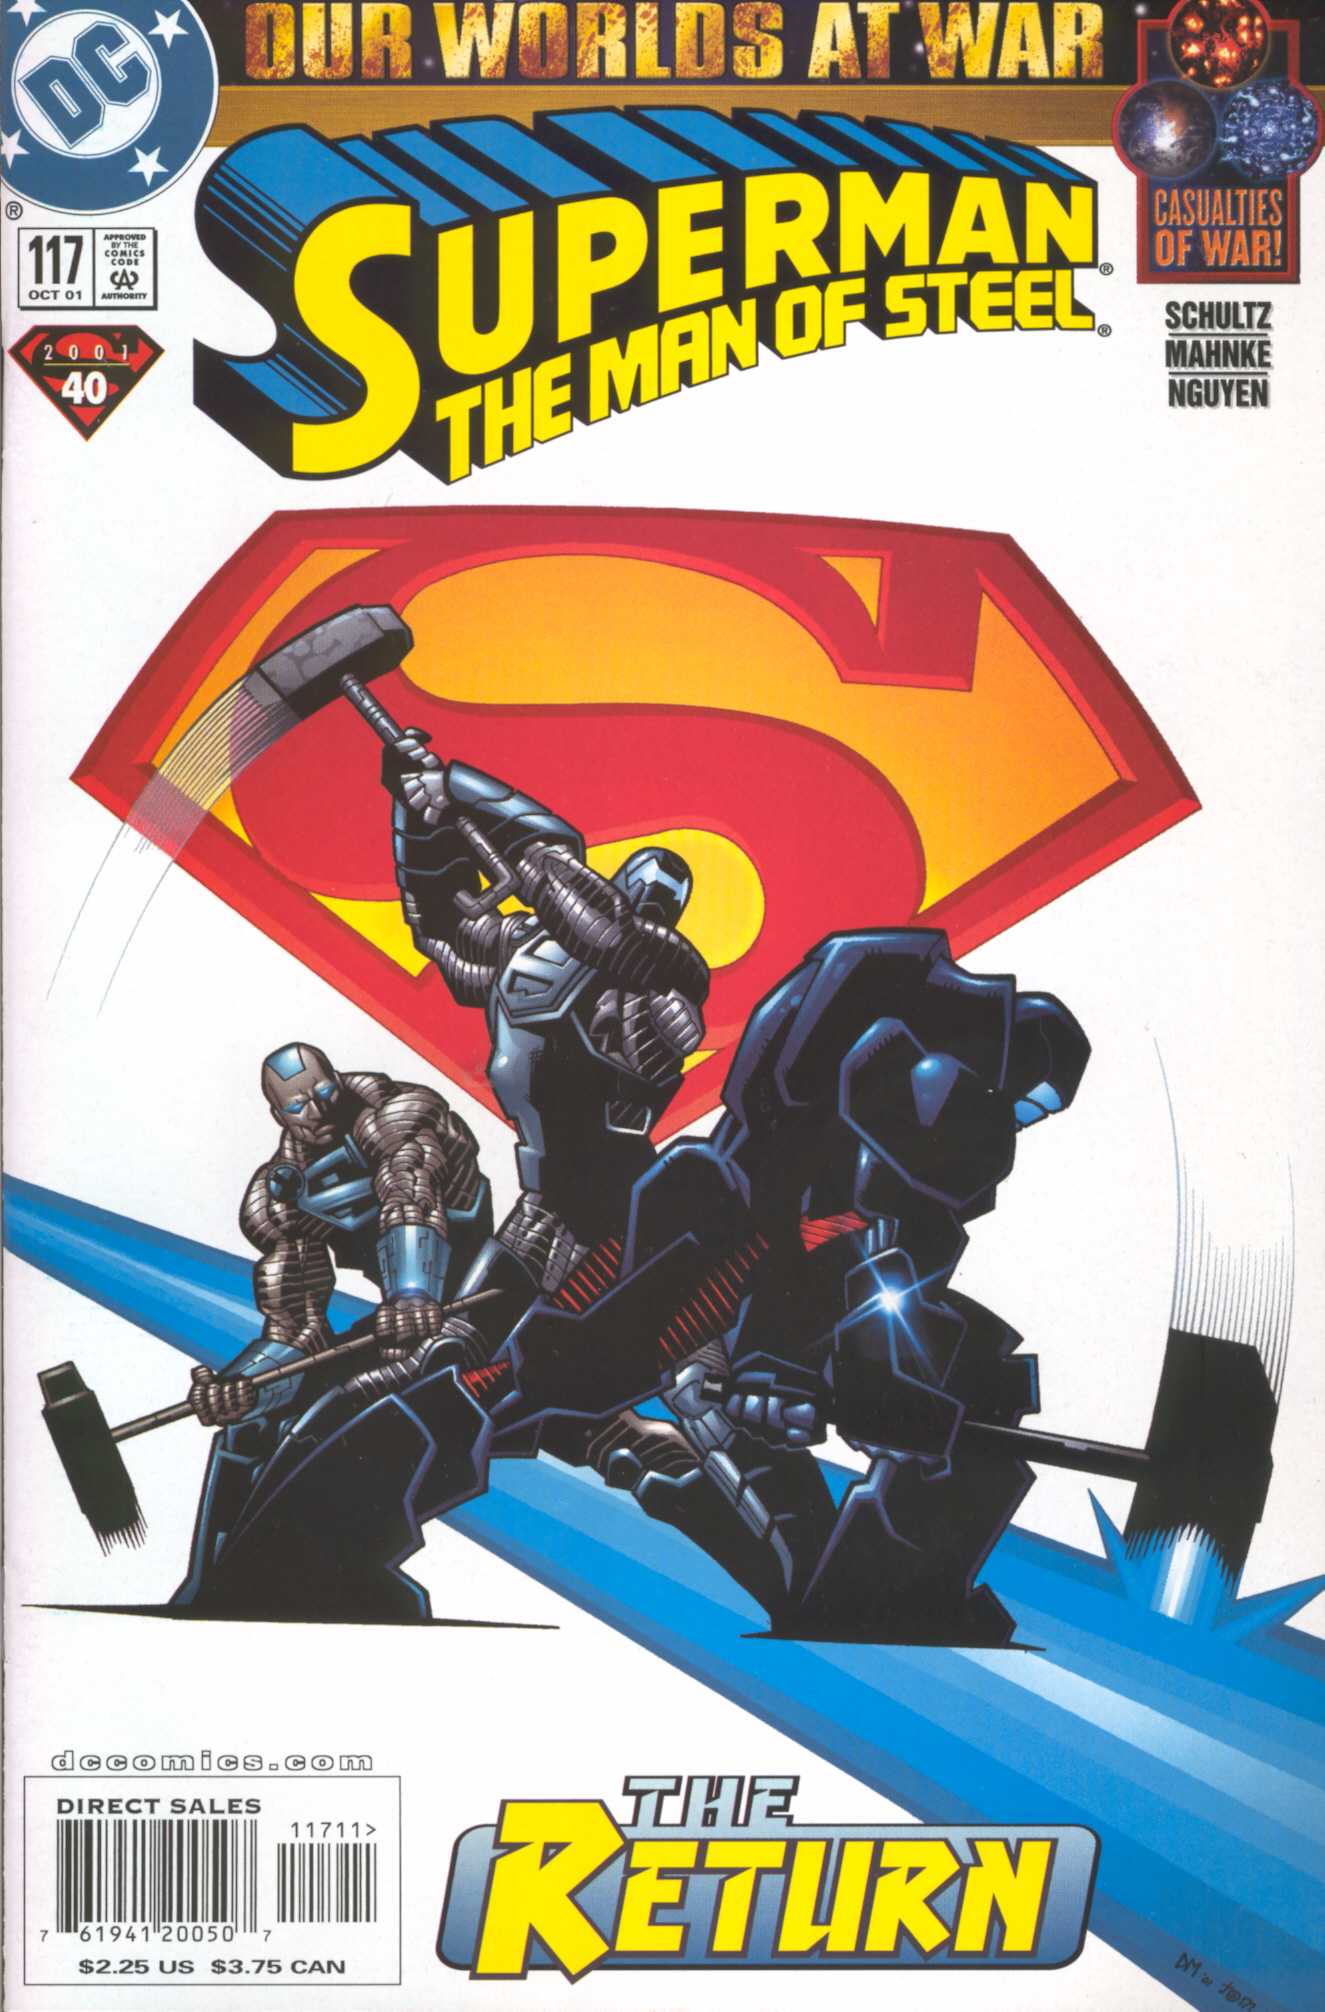 SUPERMAN THE MAN OF STEEL NO.117